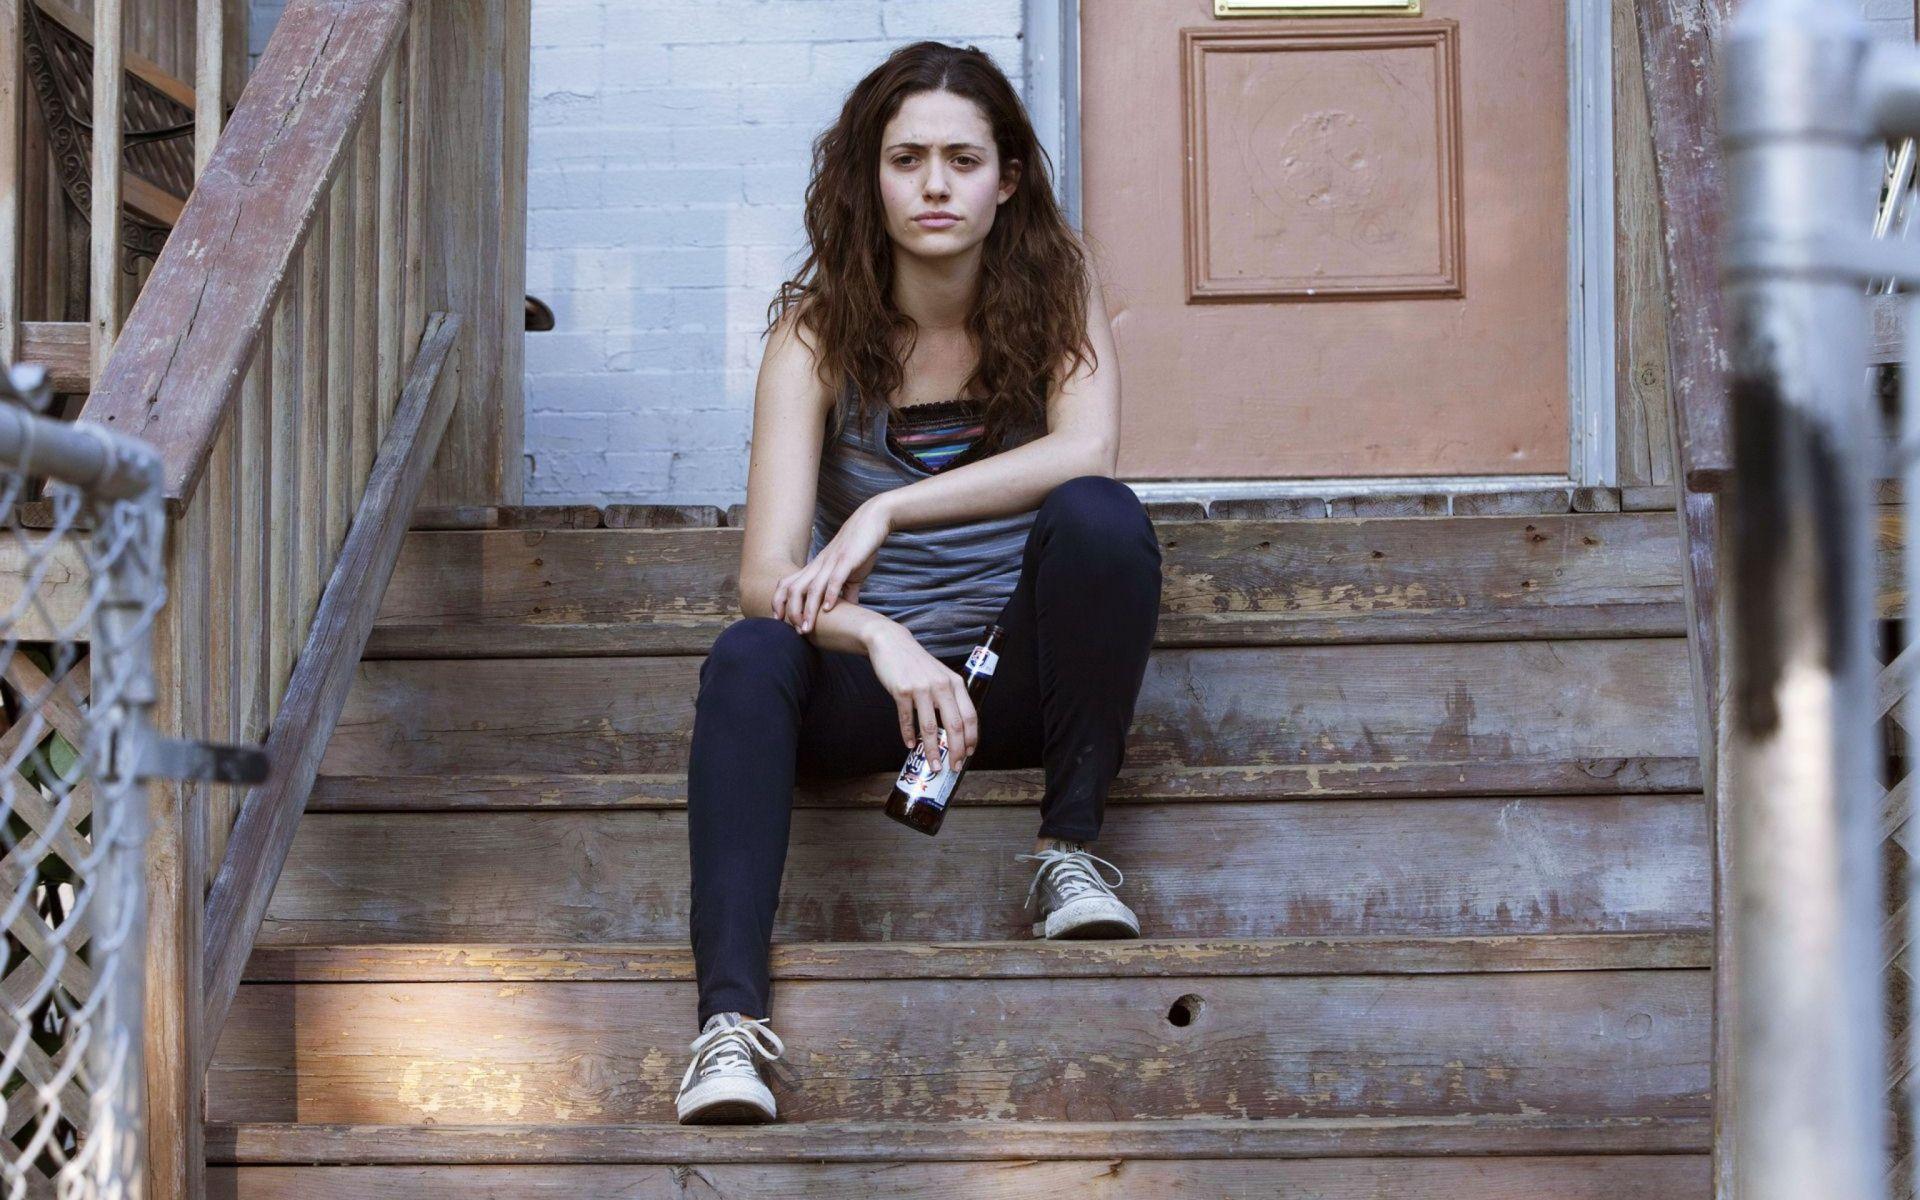 Emmy Rossum Is Demanding Equal Pay for Her Work on Shameless